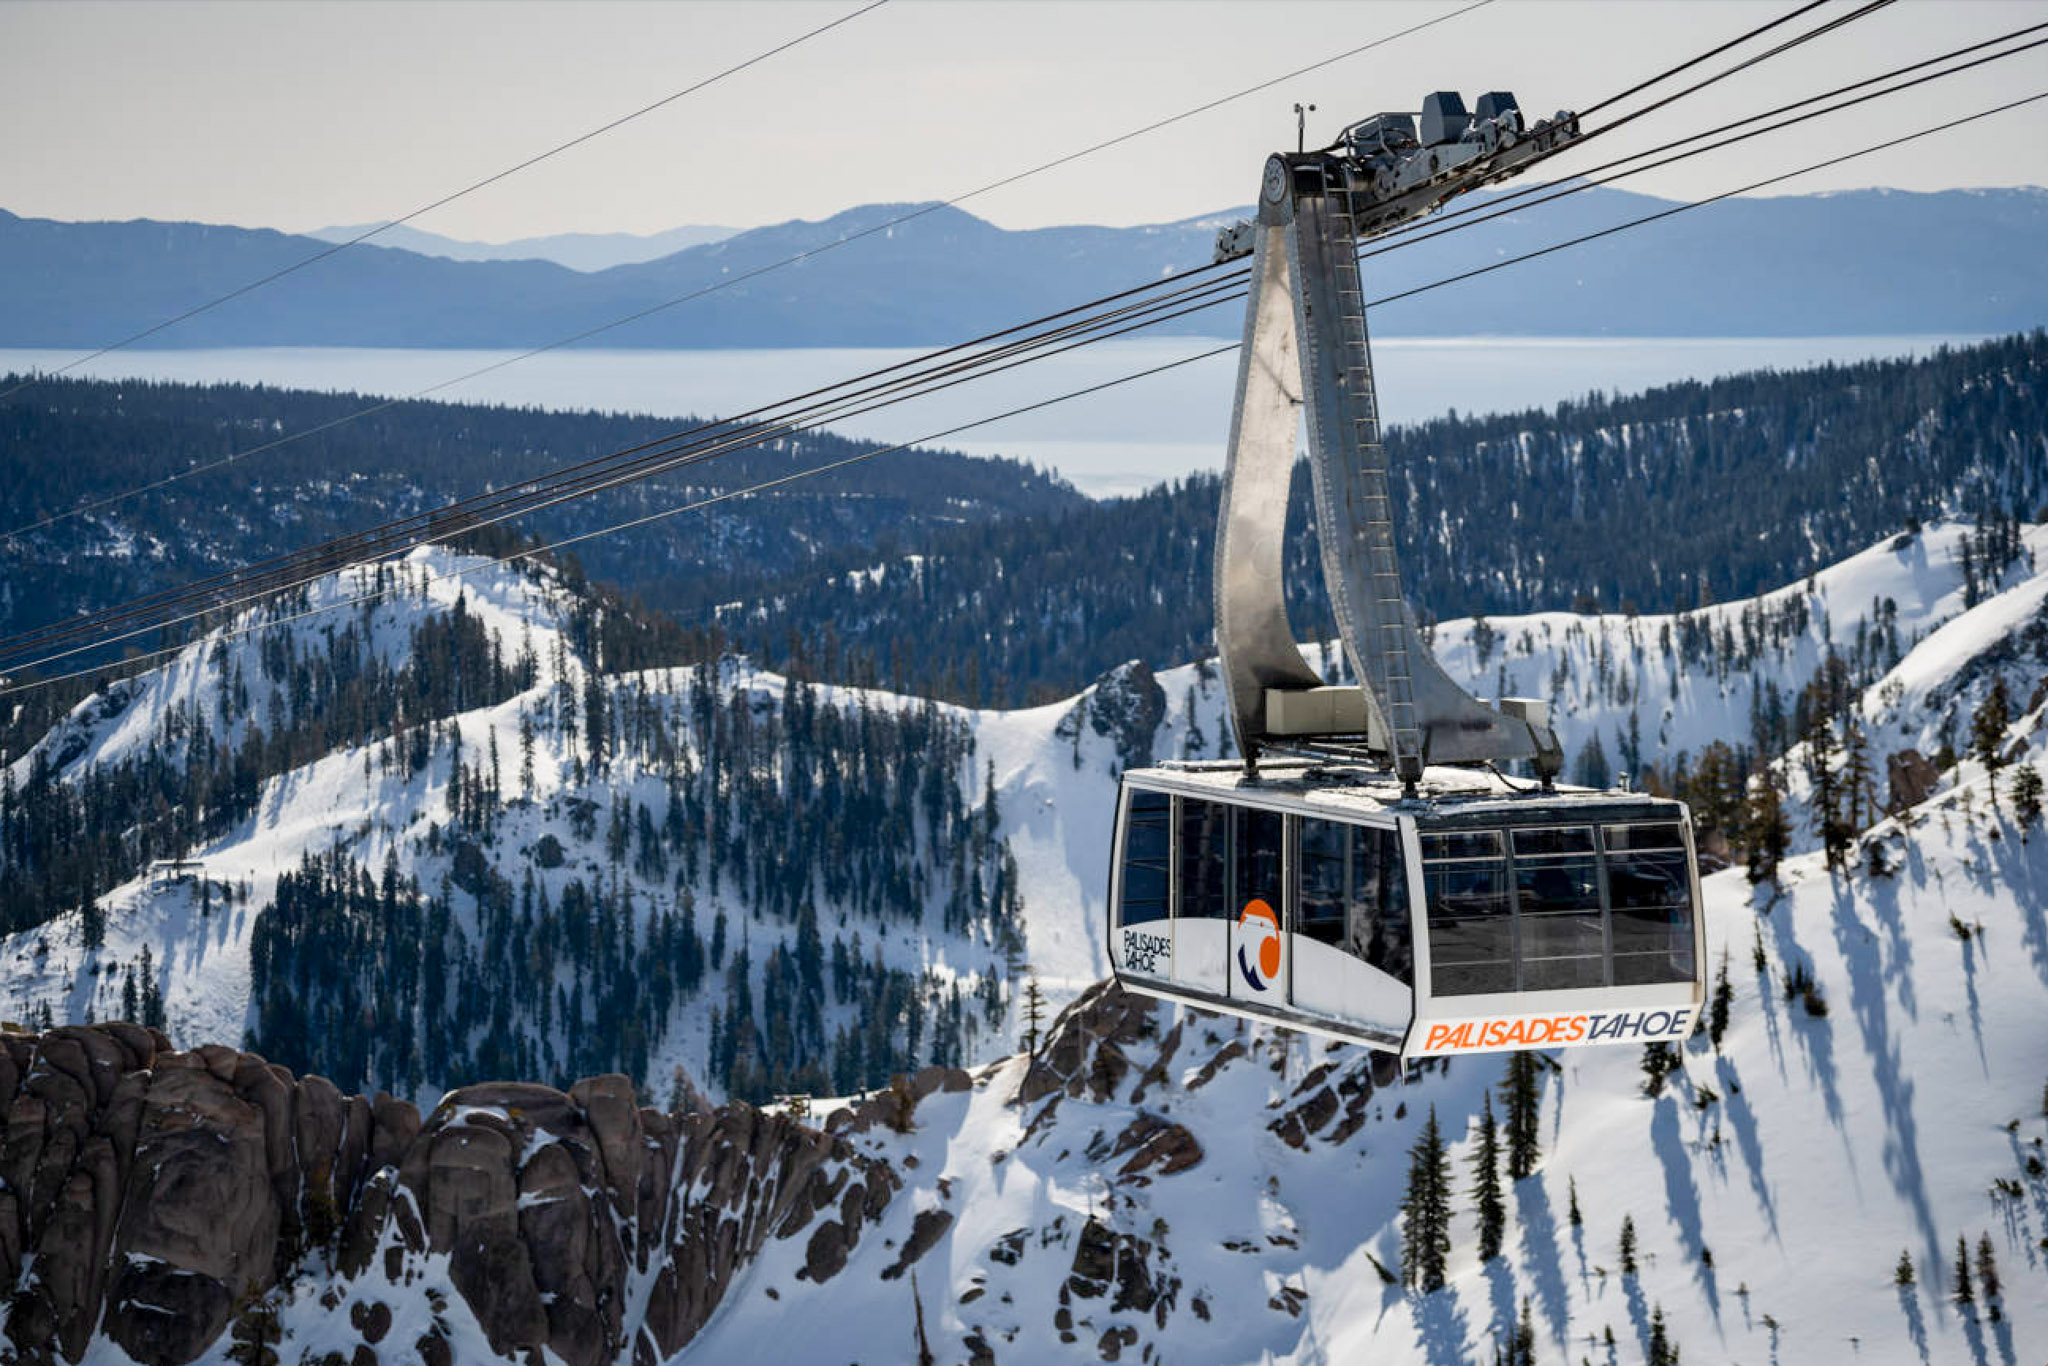 An aerial tram hangs from cables amidst a snowy winter scene with Lake Tahoe in the background.